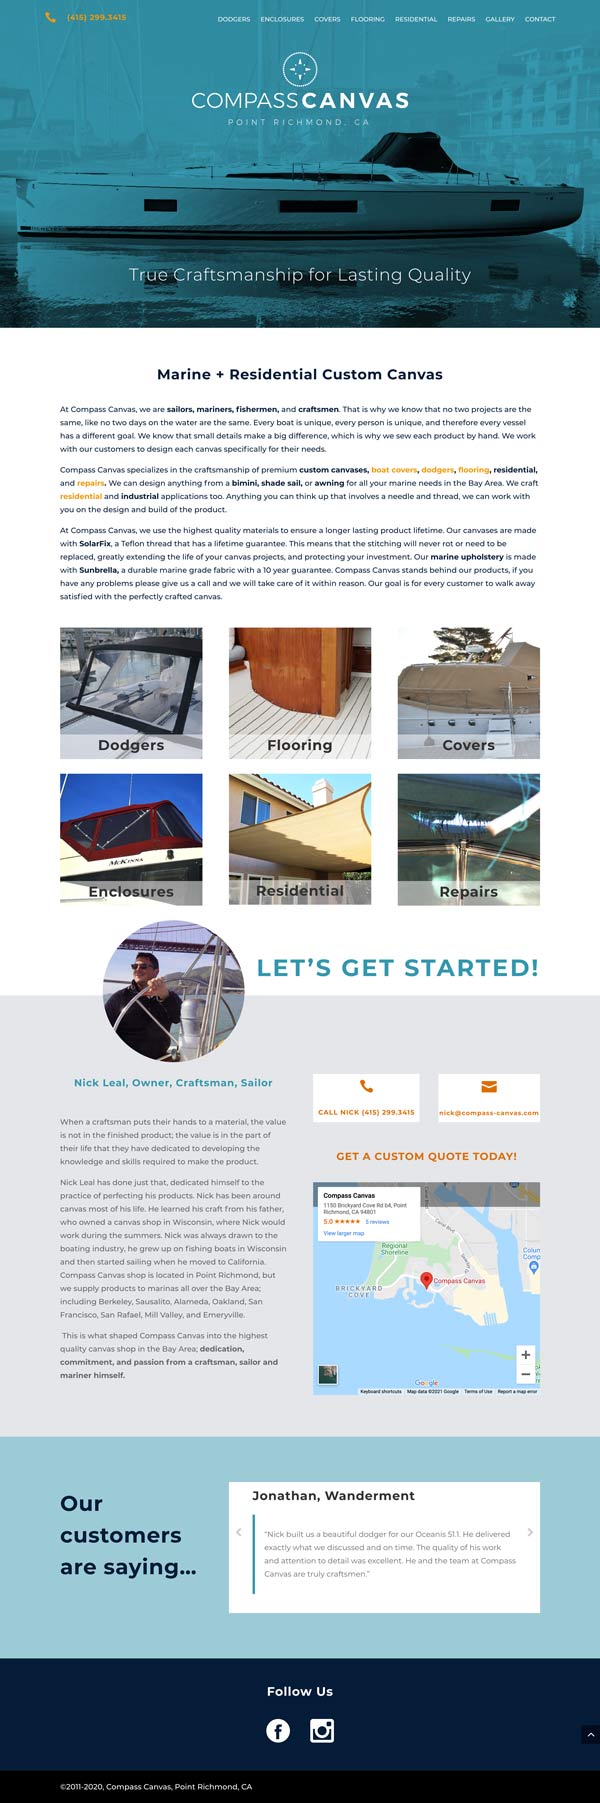 Compass Canvas website built by Wicked Code